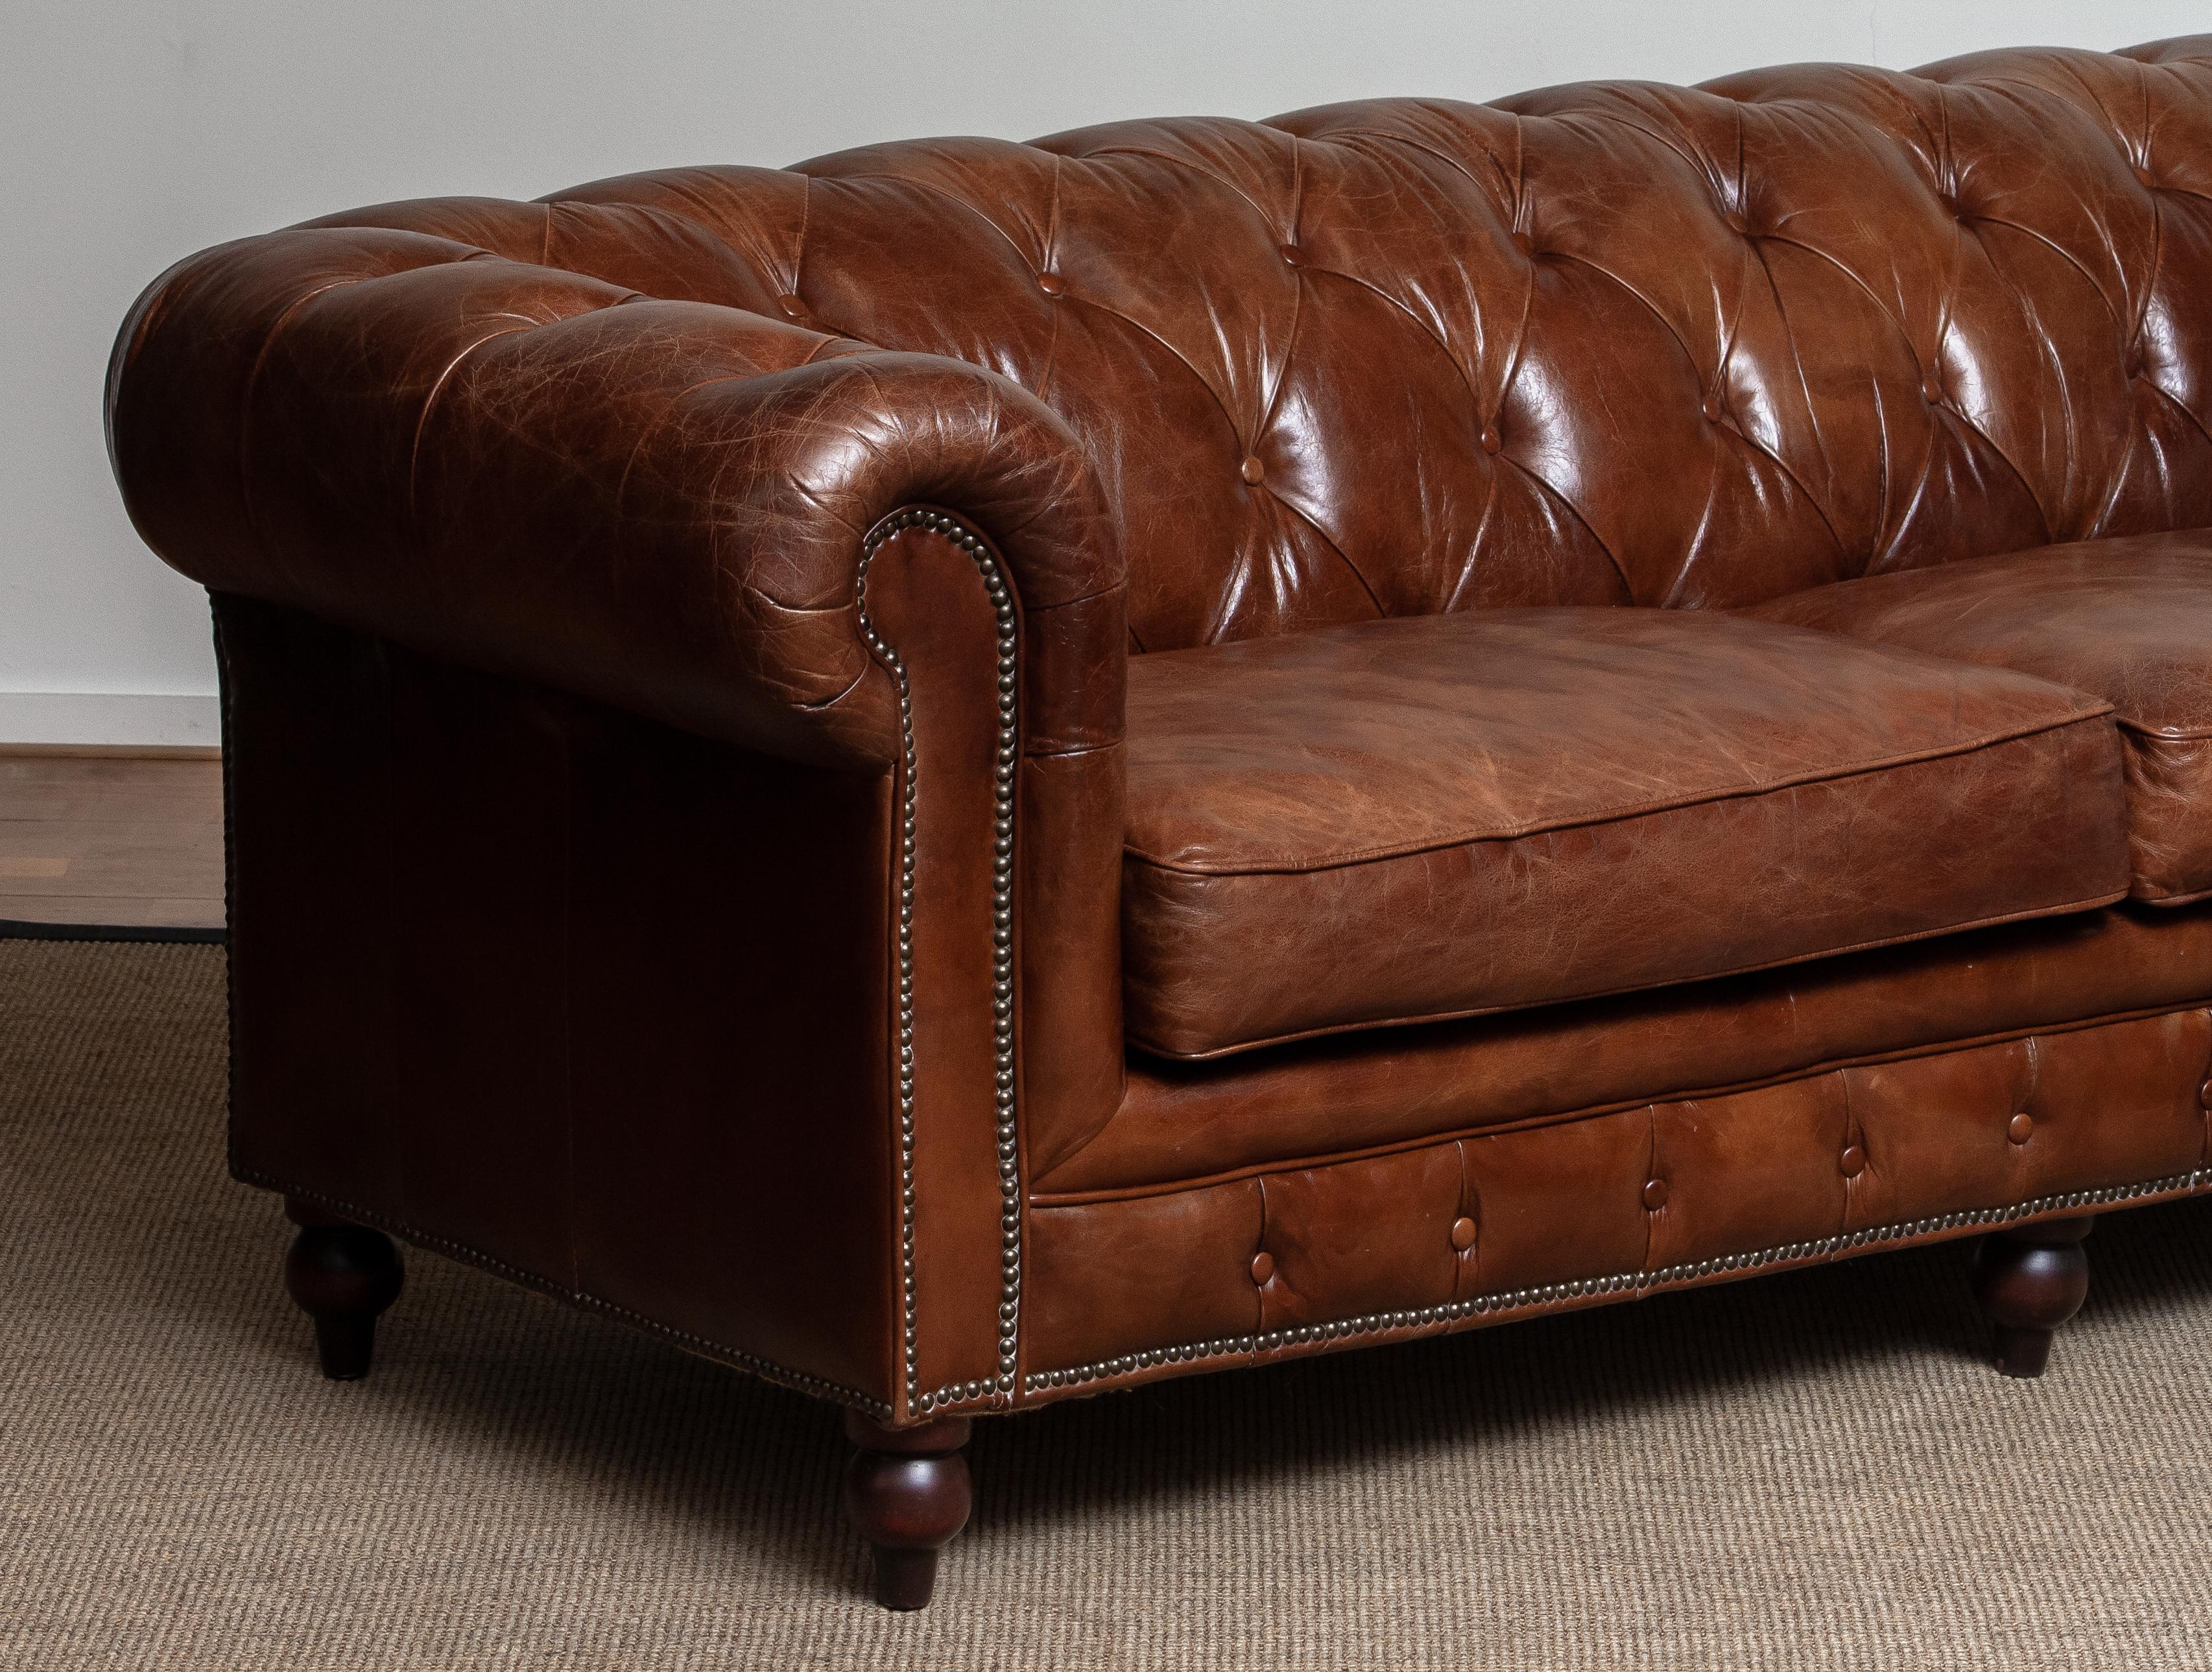 Tufted Brown Leather English Chesterfield Sofa from the 20th Century 2